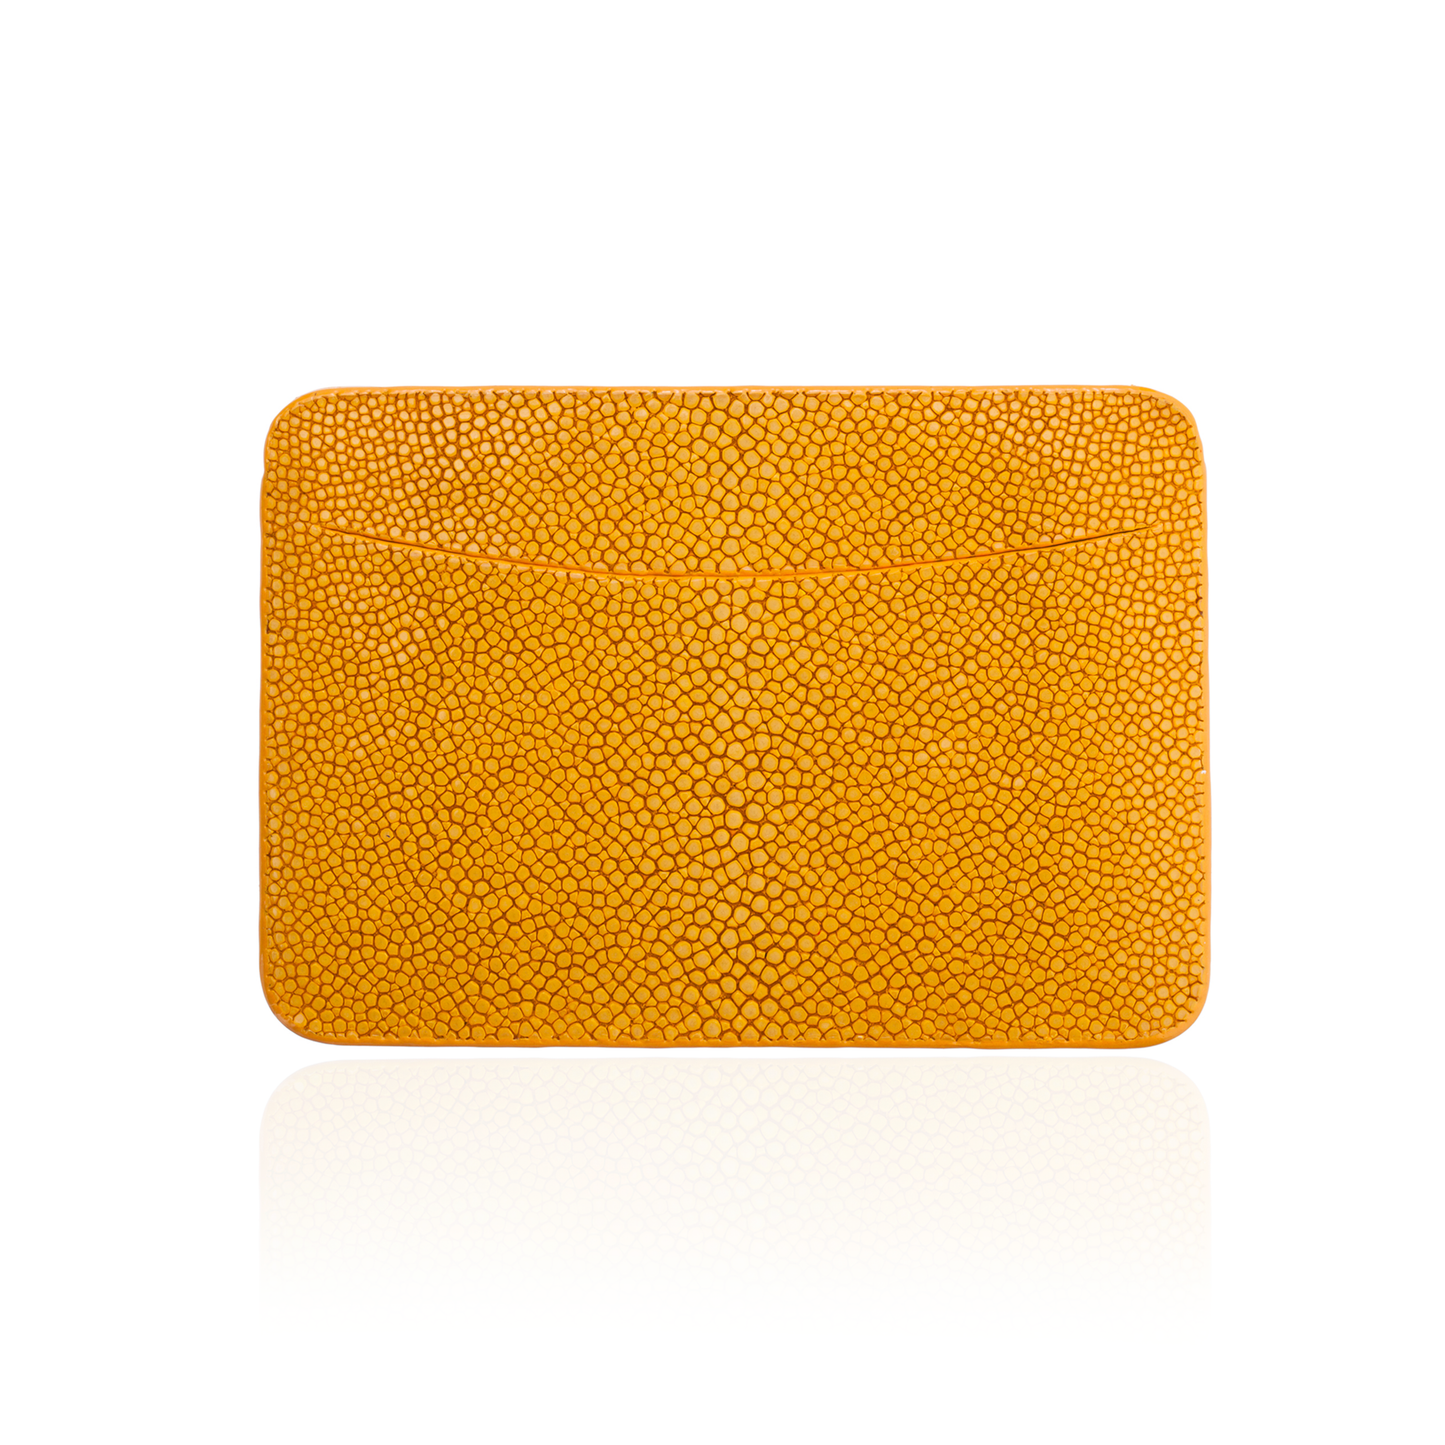 Credit Card Zip Pouch in Orange Textured Leather – Sazingg